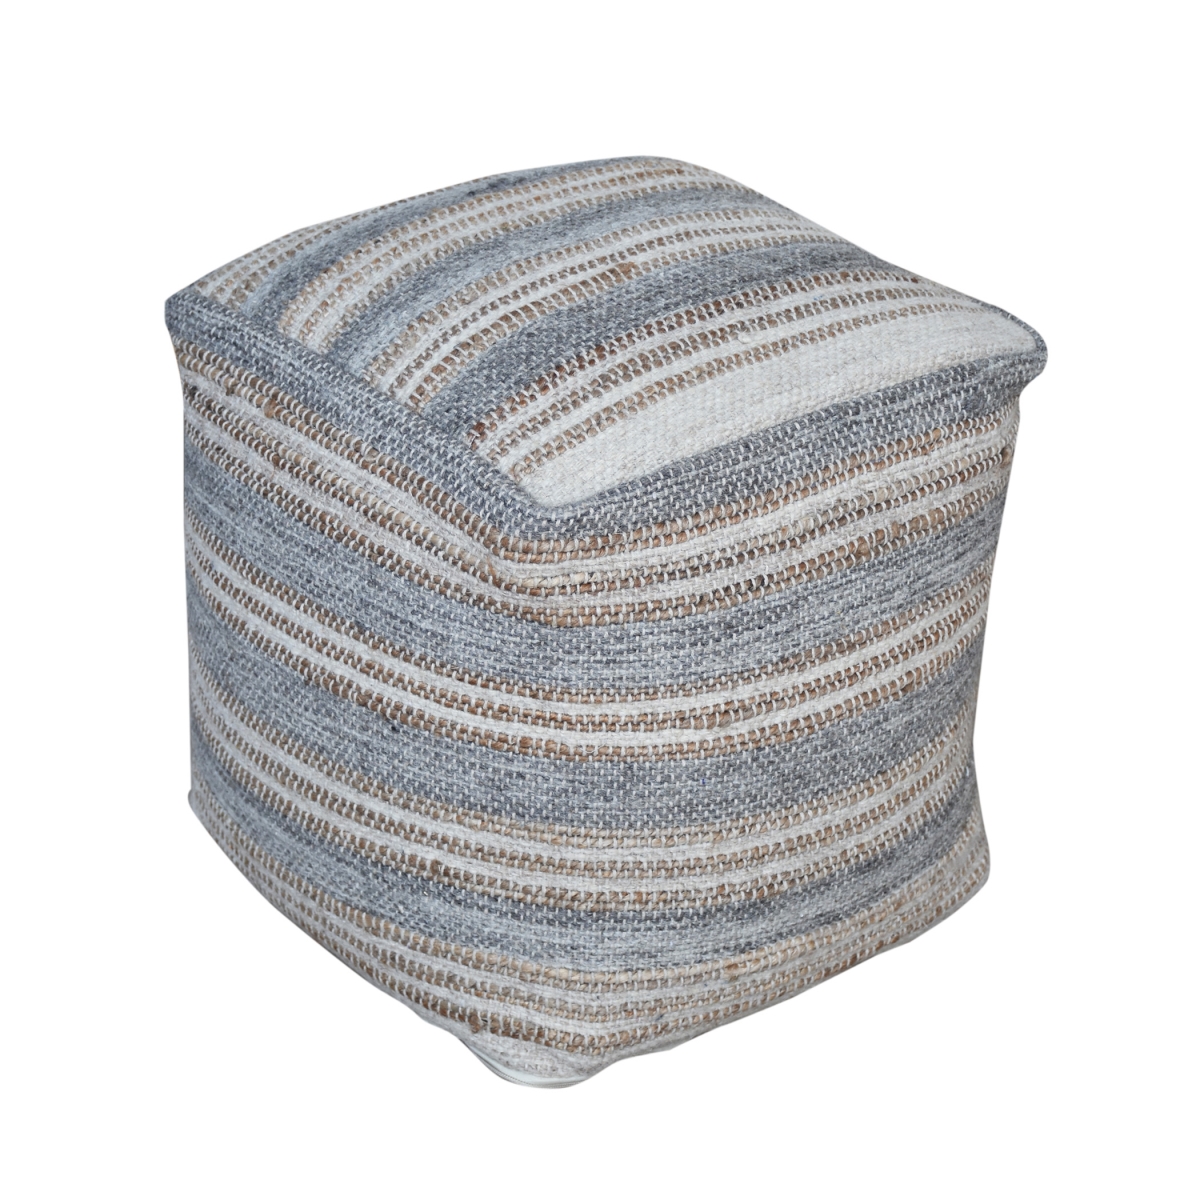 Picture of 212 Main 23967 Mesick Handwoven Gray Pouf